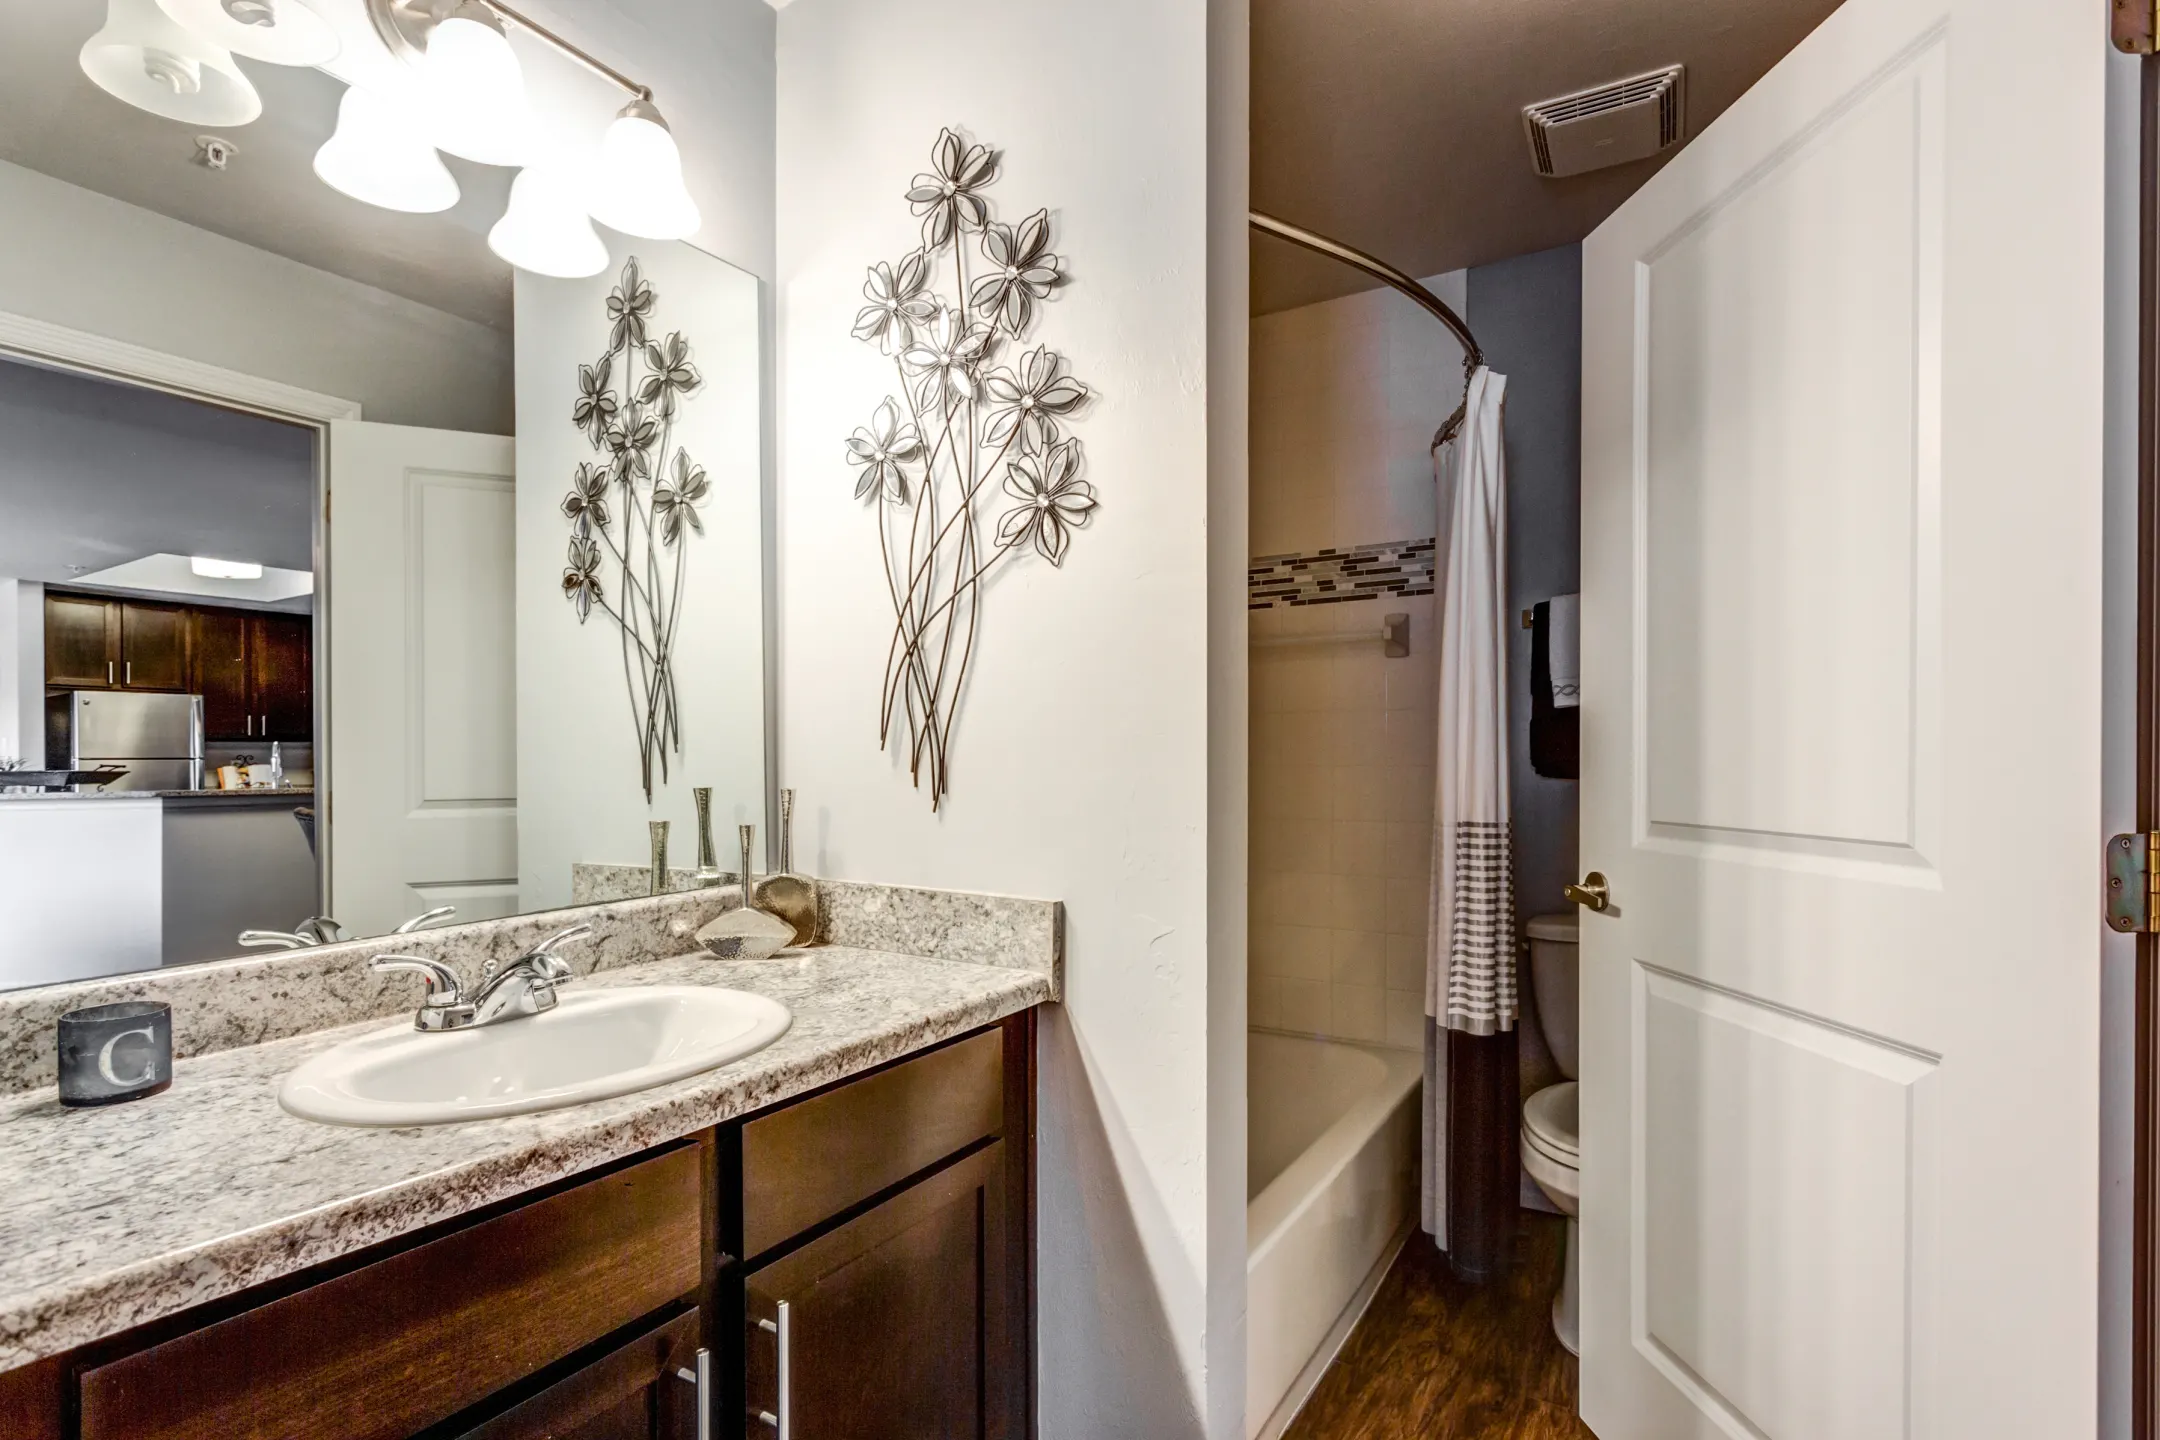 Bathroom - Channelside Contemporary Living Apartments - Fort Myers, FL